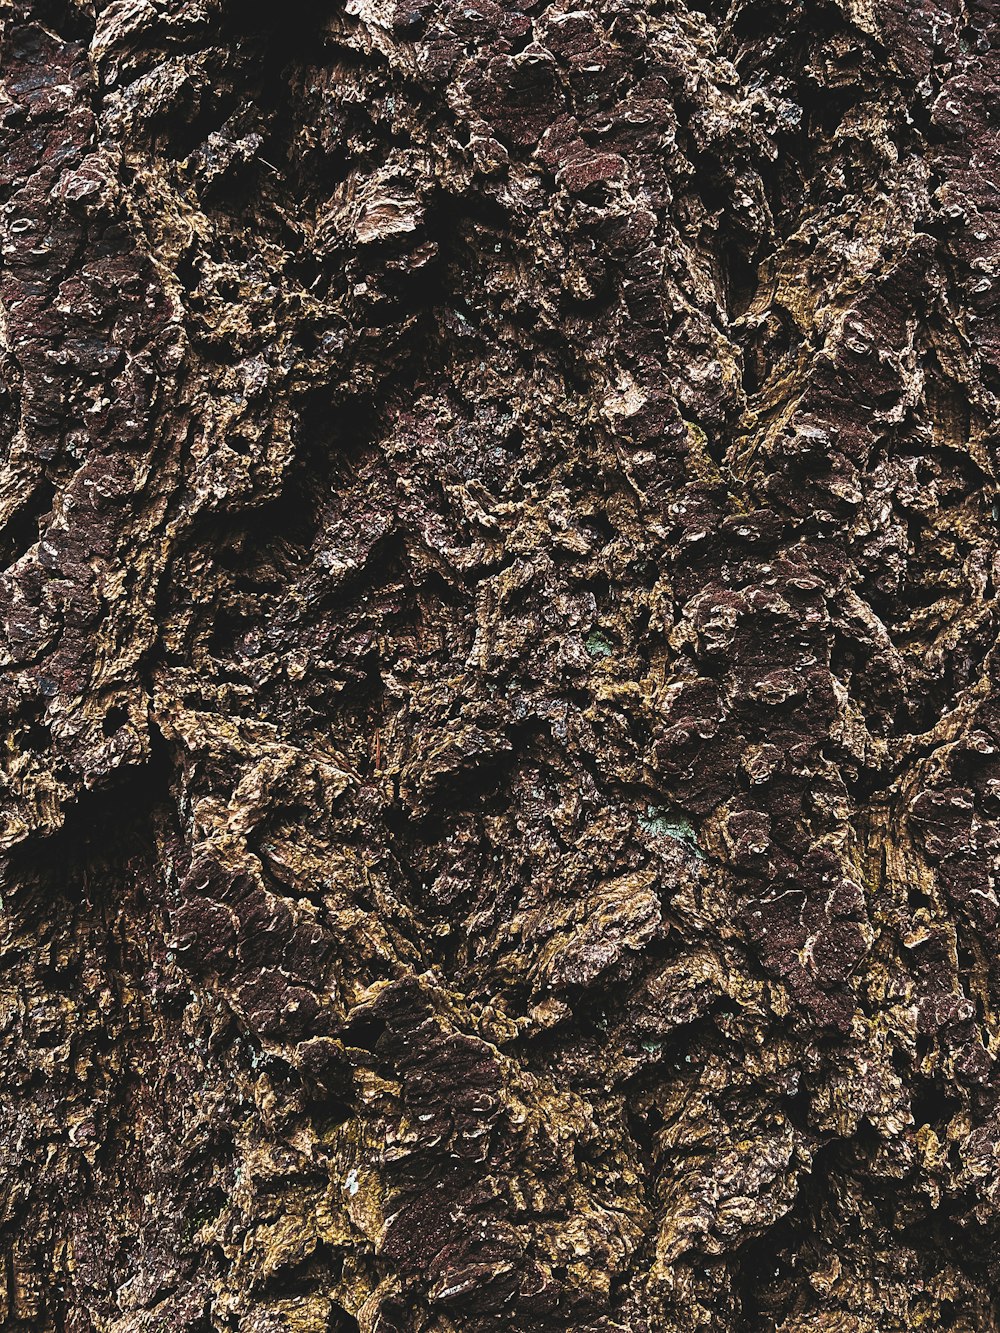 the bark of a tree is brown and brown